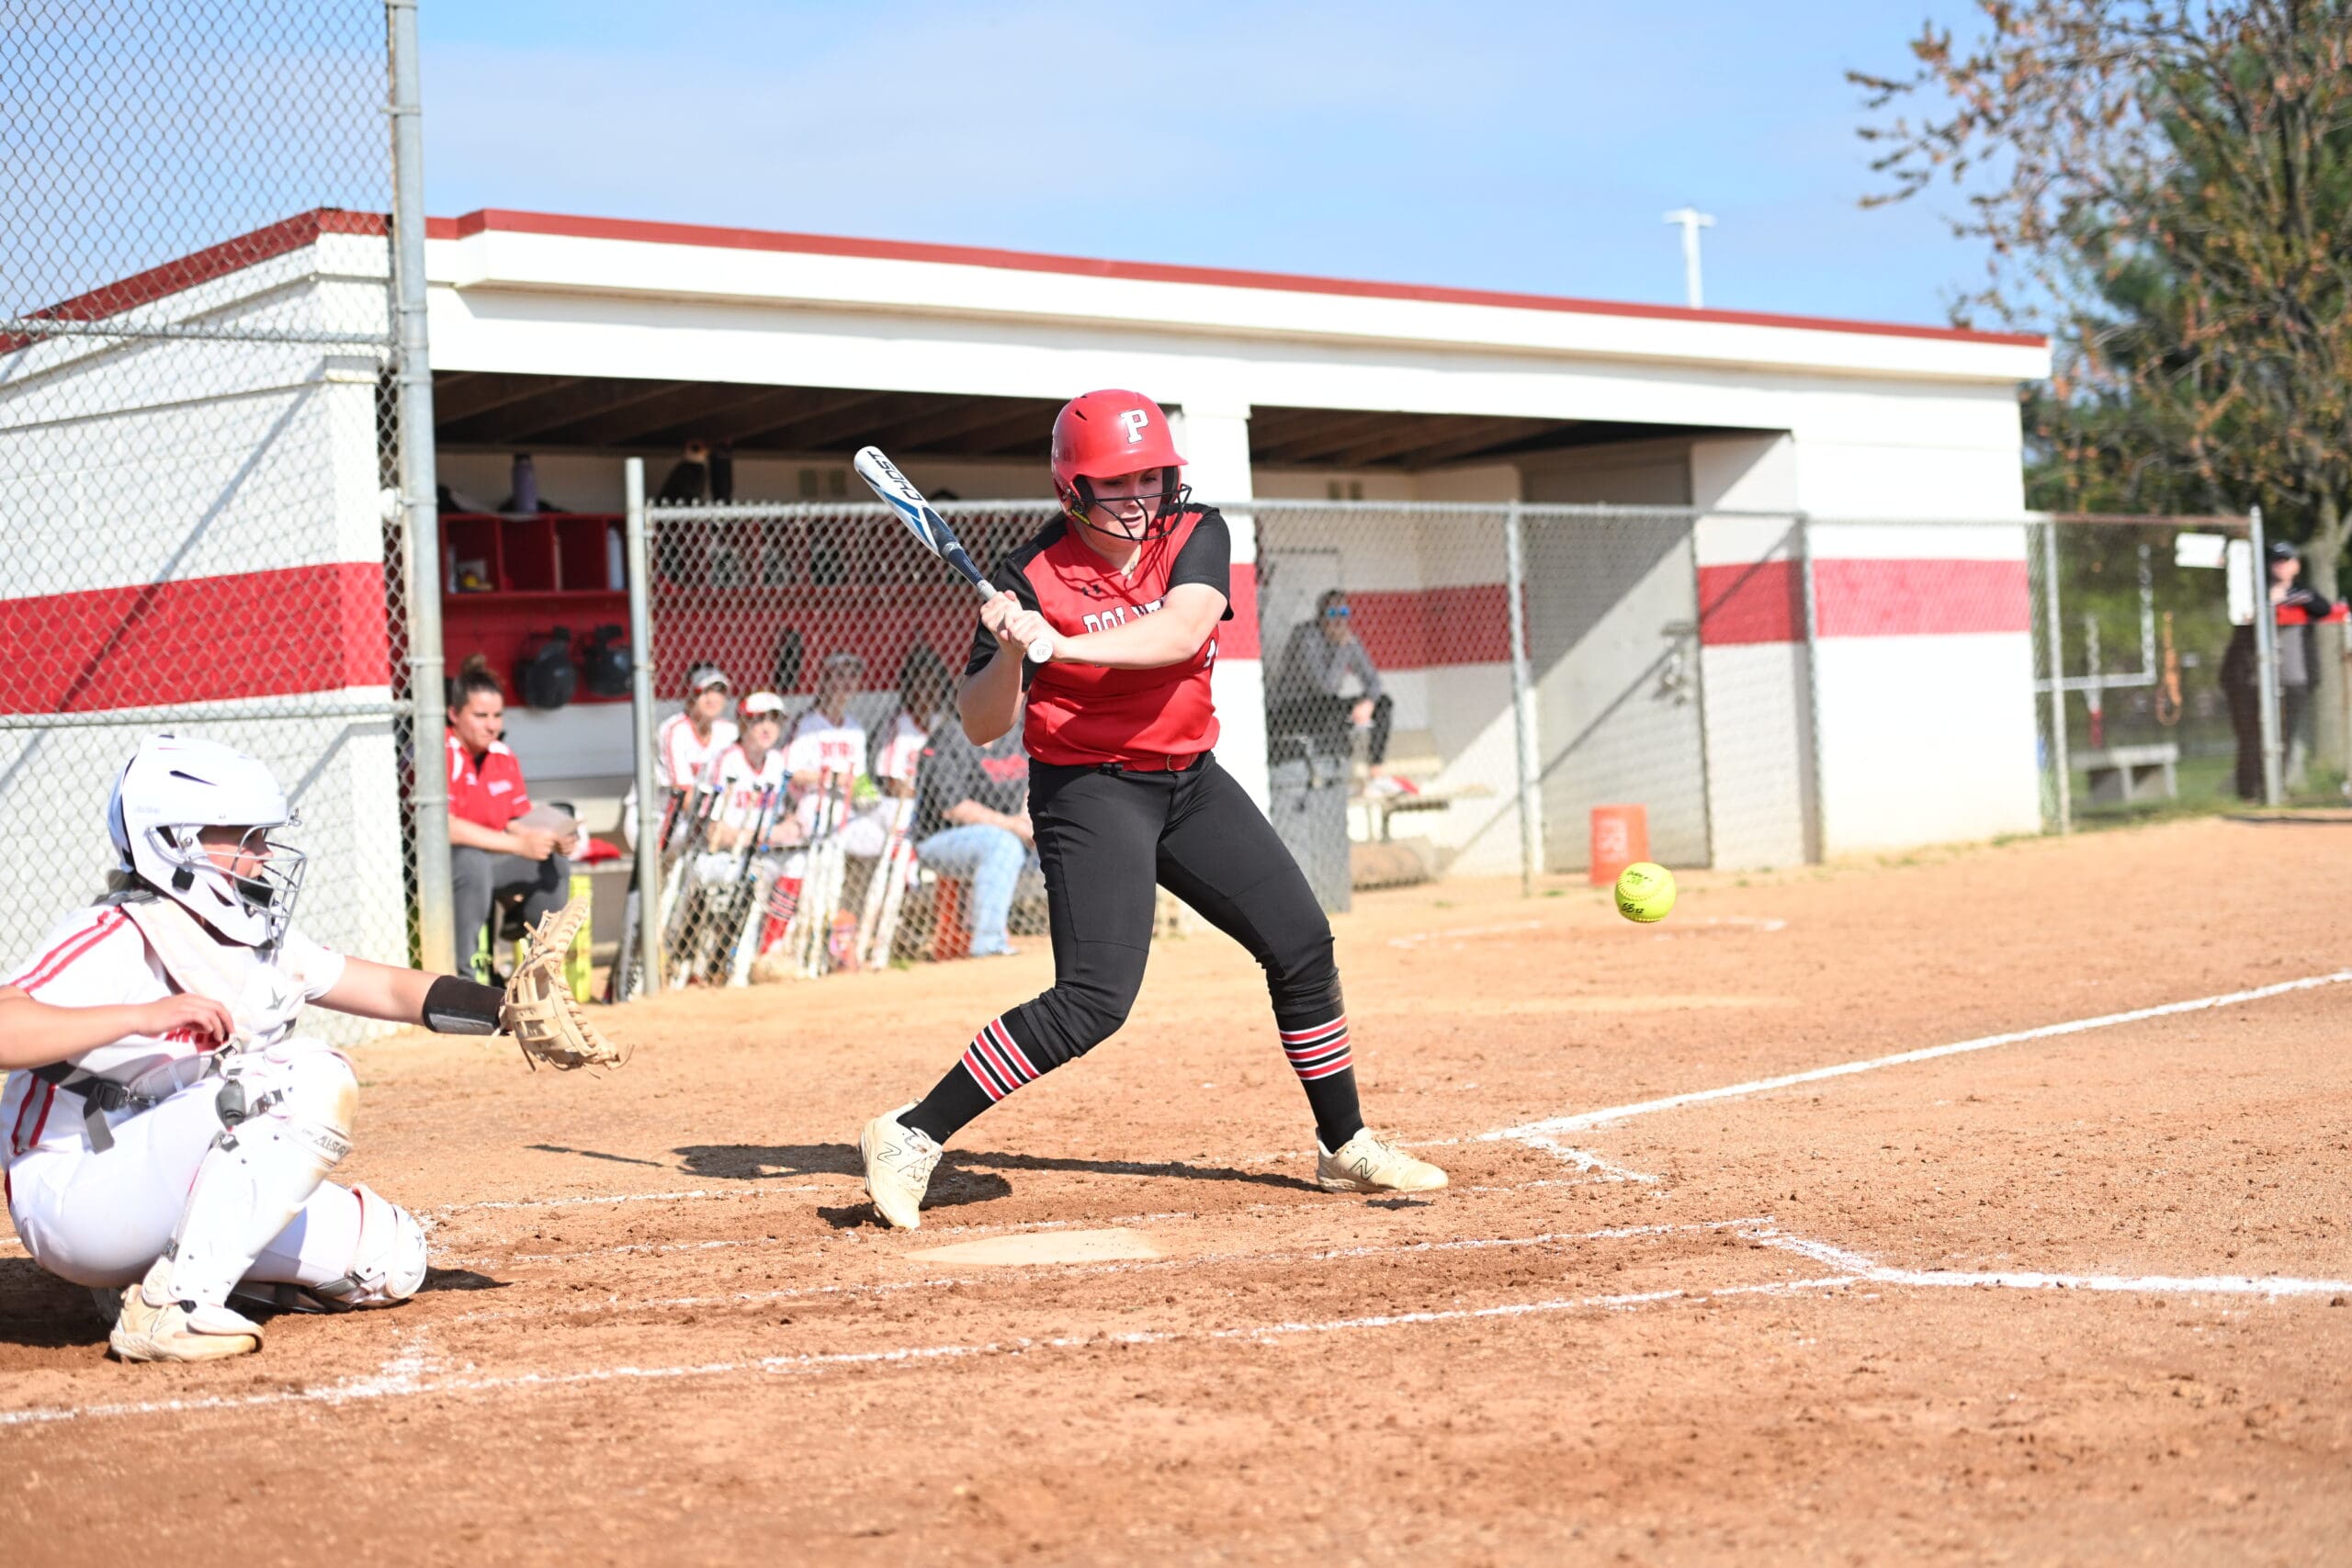 Polytech sofball Julia MacConnel hit a three run homerun in their win over Smyrna. Photo by Ben Fulton scaled